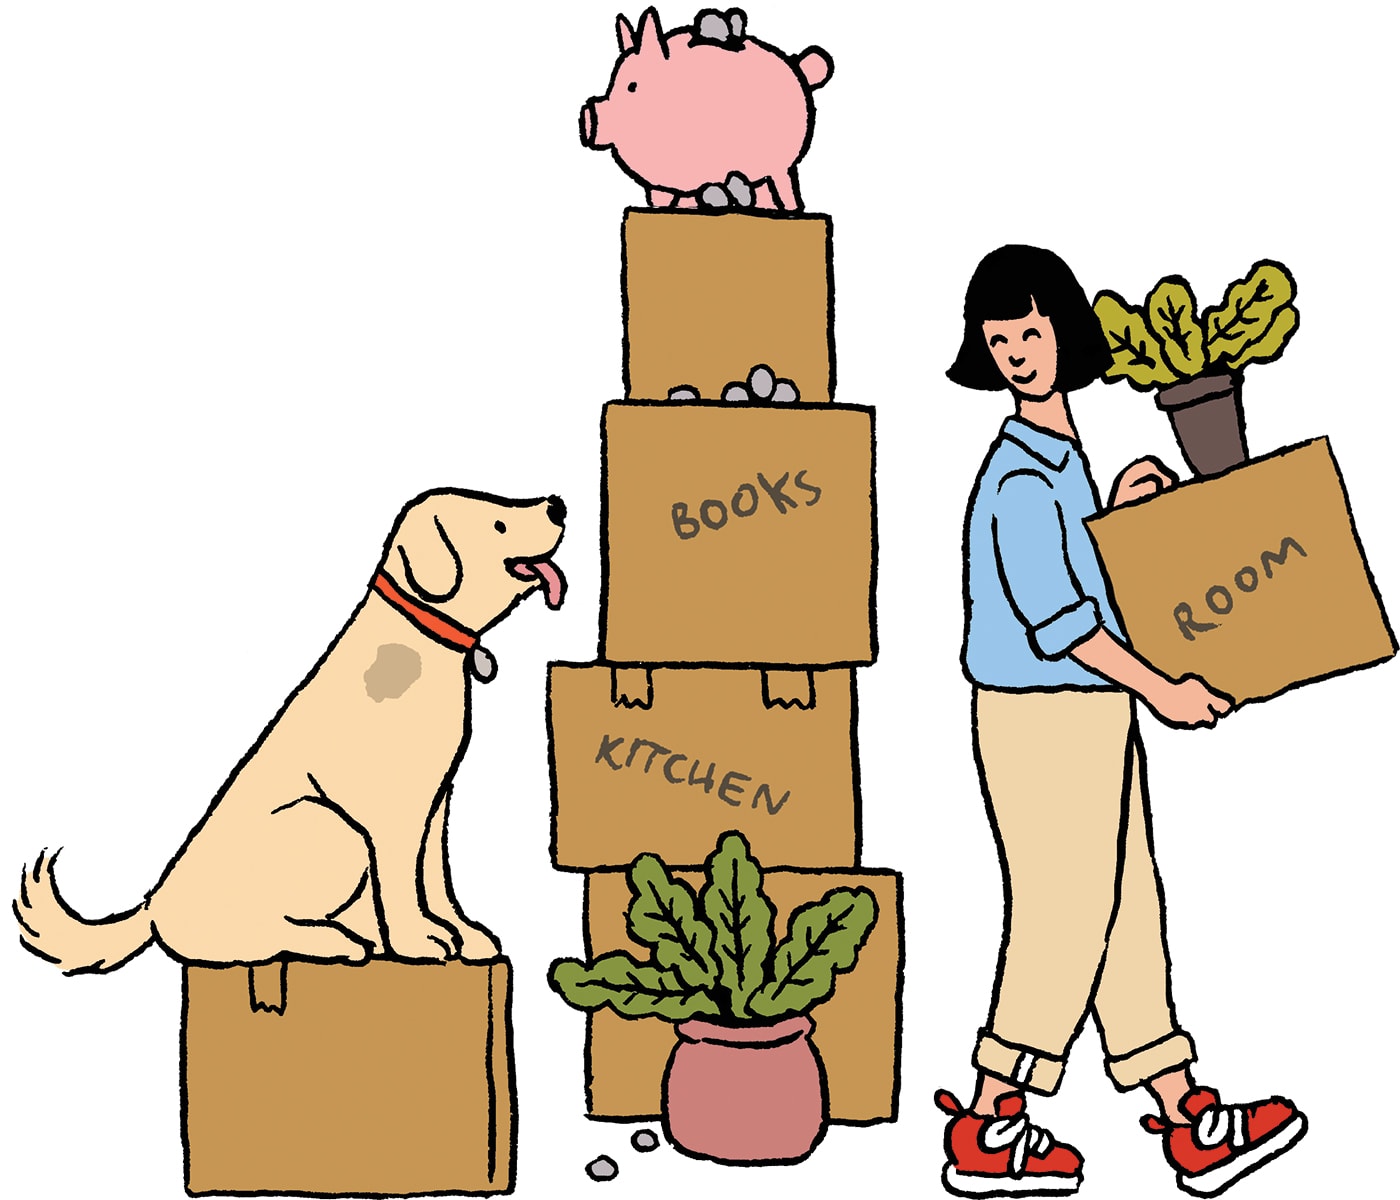 Illustration of a person moving house, with potted plants, a piggy bank, and a dog. 